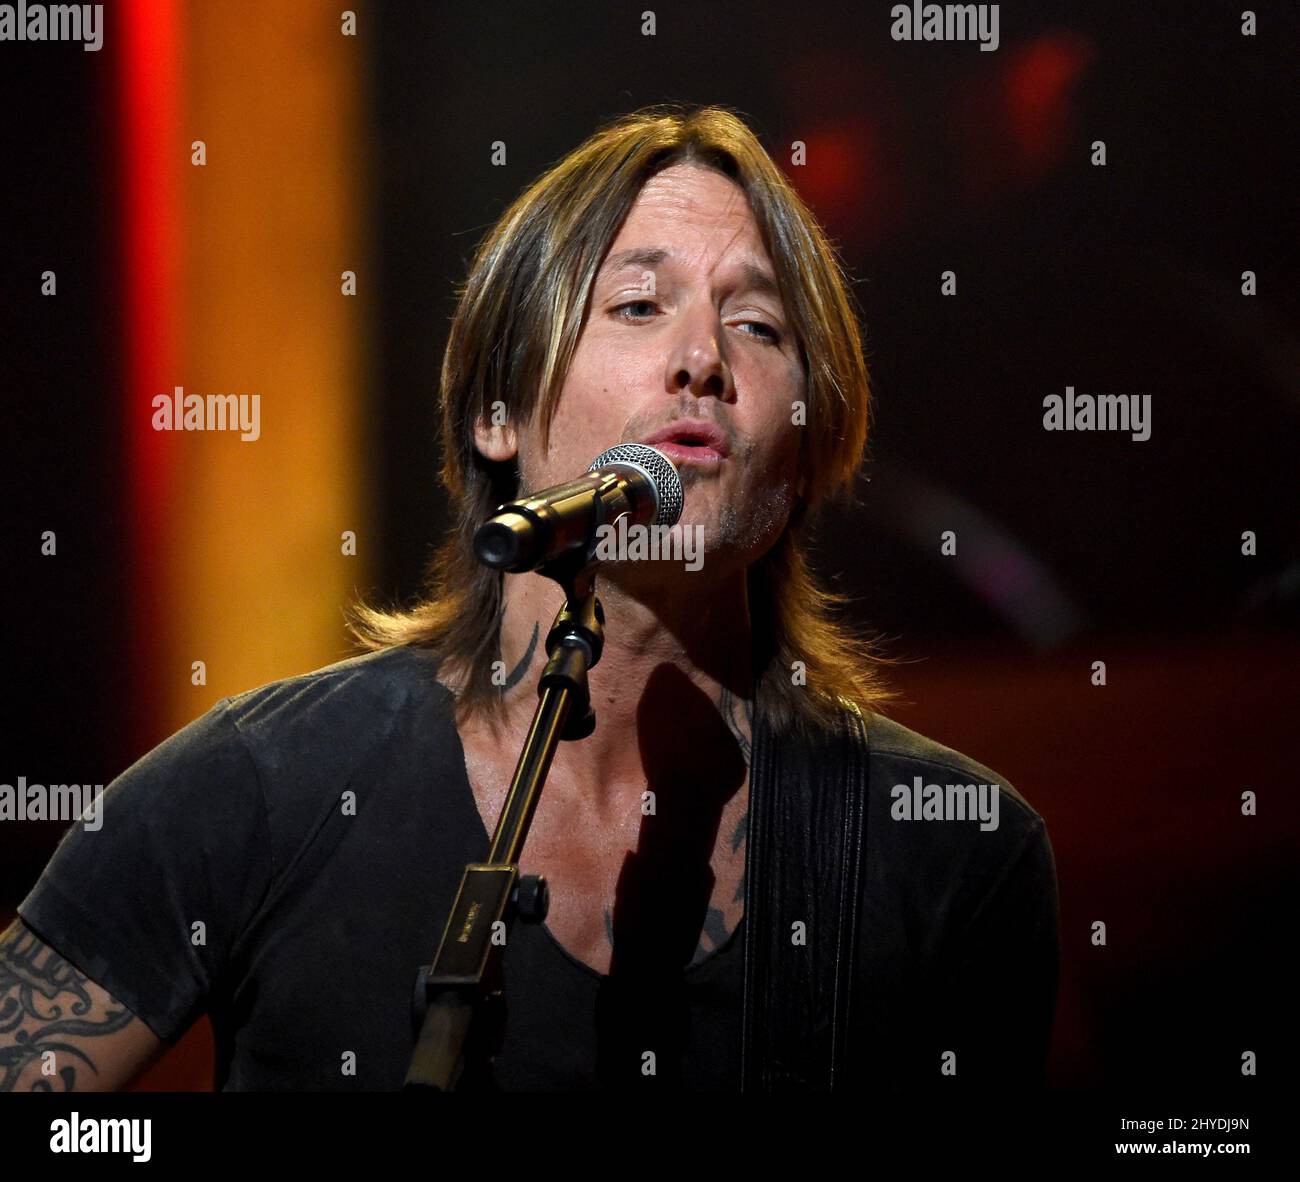 Keith Urban during Tuesday night performances at the Grand Ole Opry